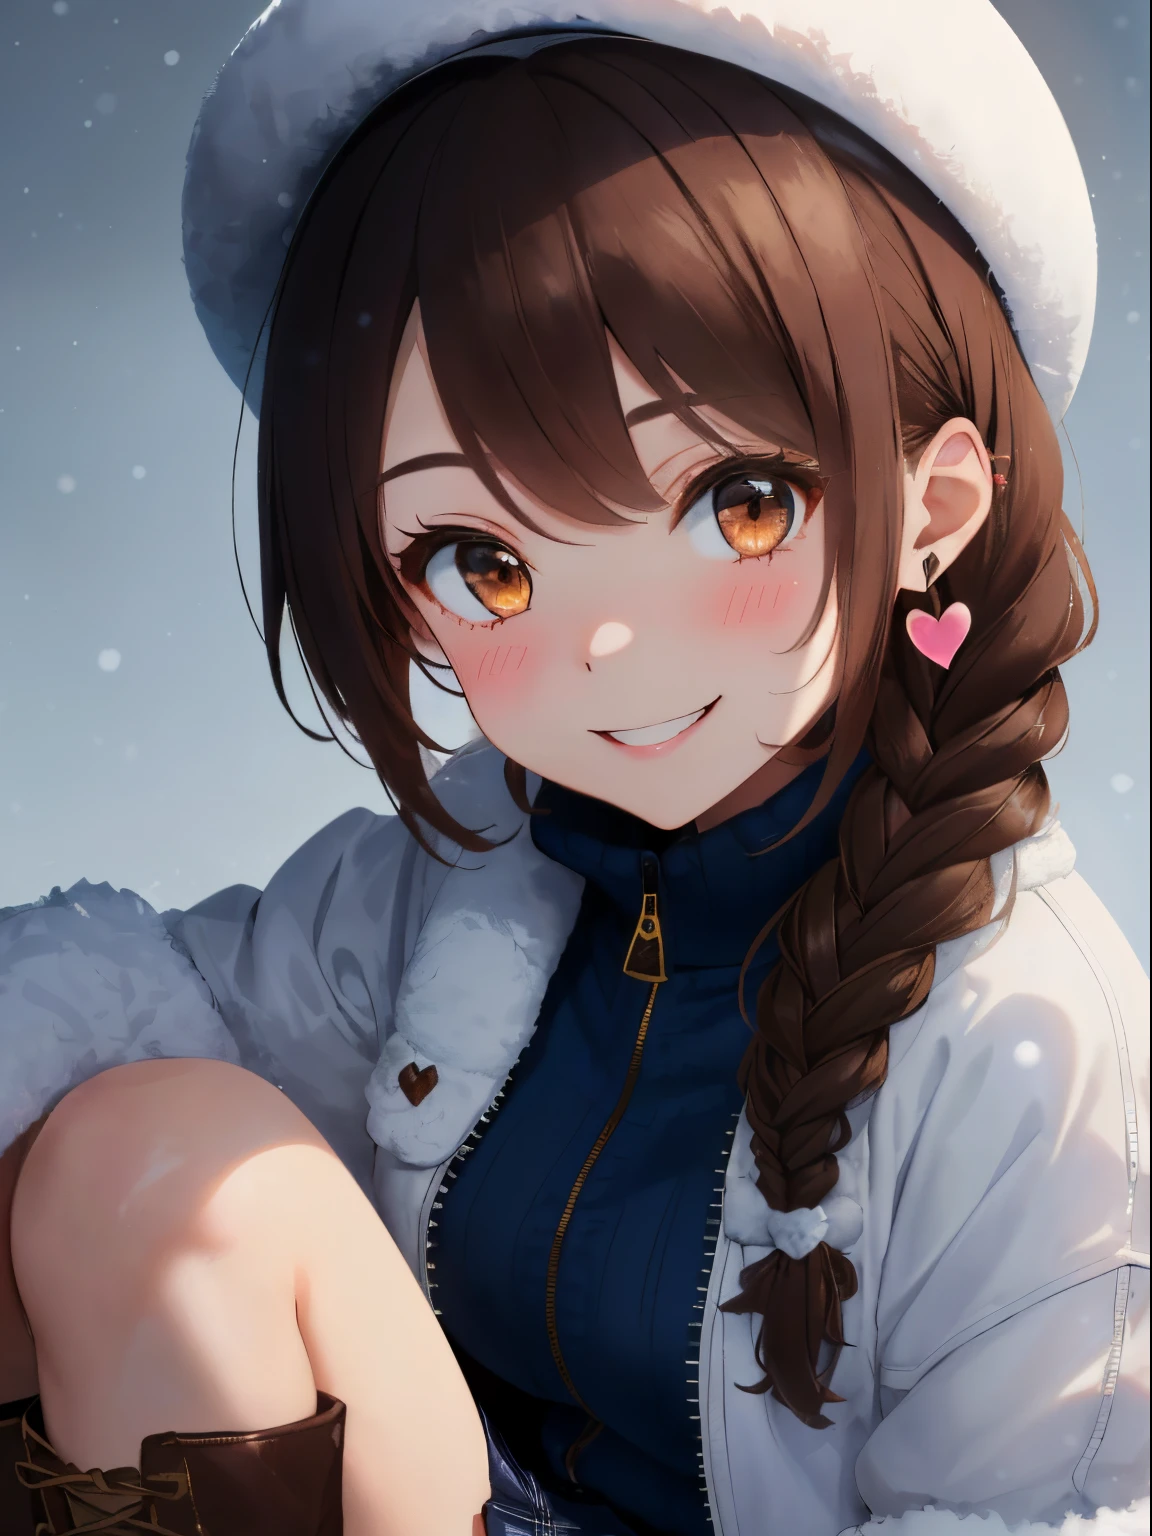 fluffy hair,((brown haired)),(Braided shorthair),Slightly red tide,((Brown eyes)),(white fluffy winter clothes),((black blouson jacket)),(dark blue skirt with check pattern),((Long knee-length boots)),((White hat made of fluffy material)),kindly smile,(Hearts are flying),Dating atmosphere,((close up of face))